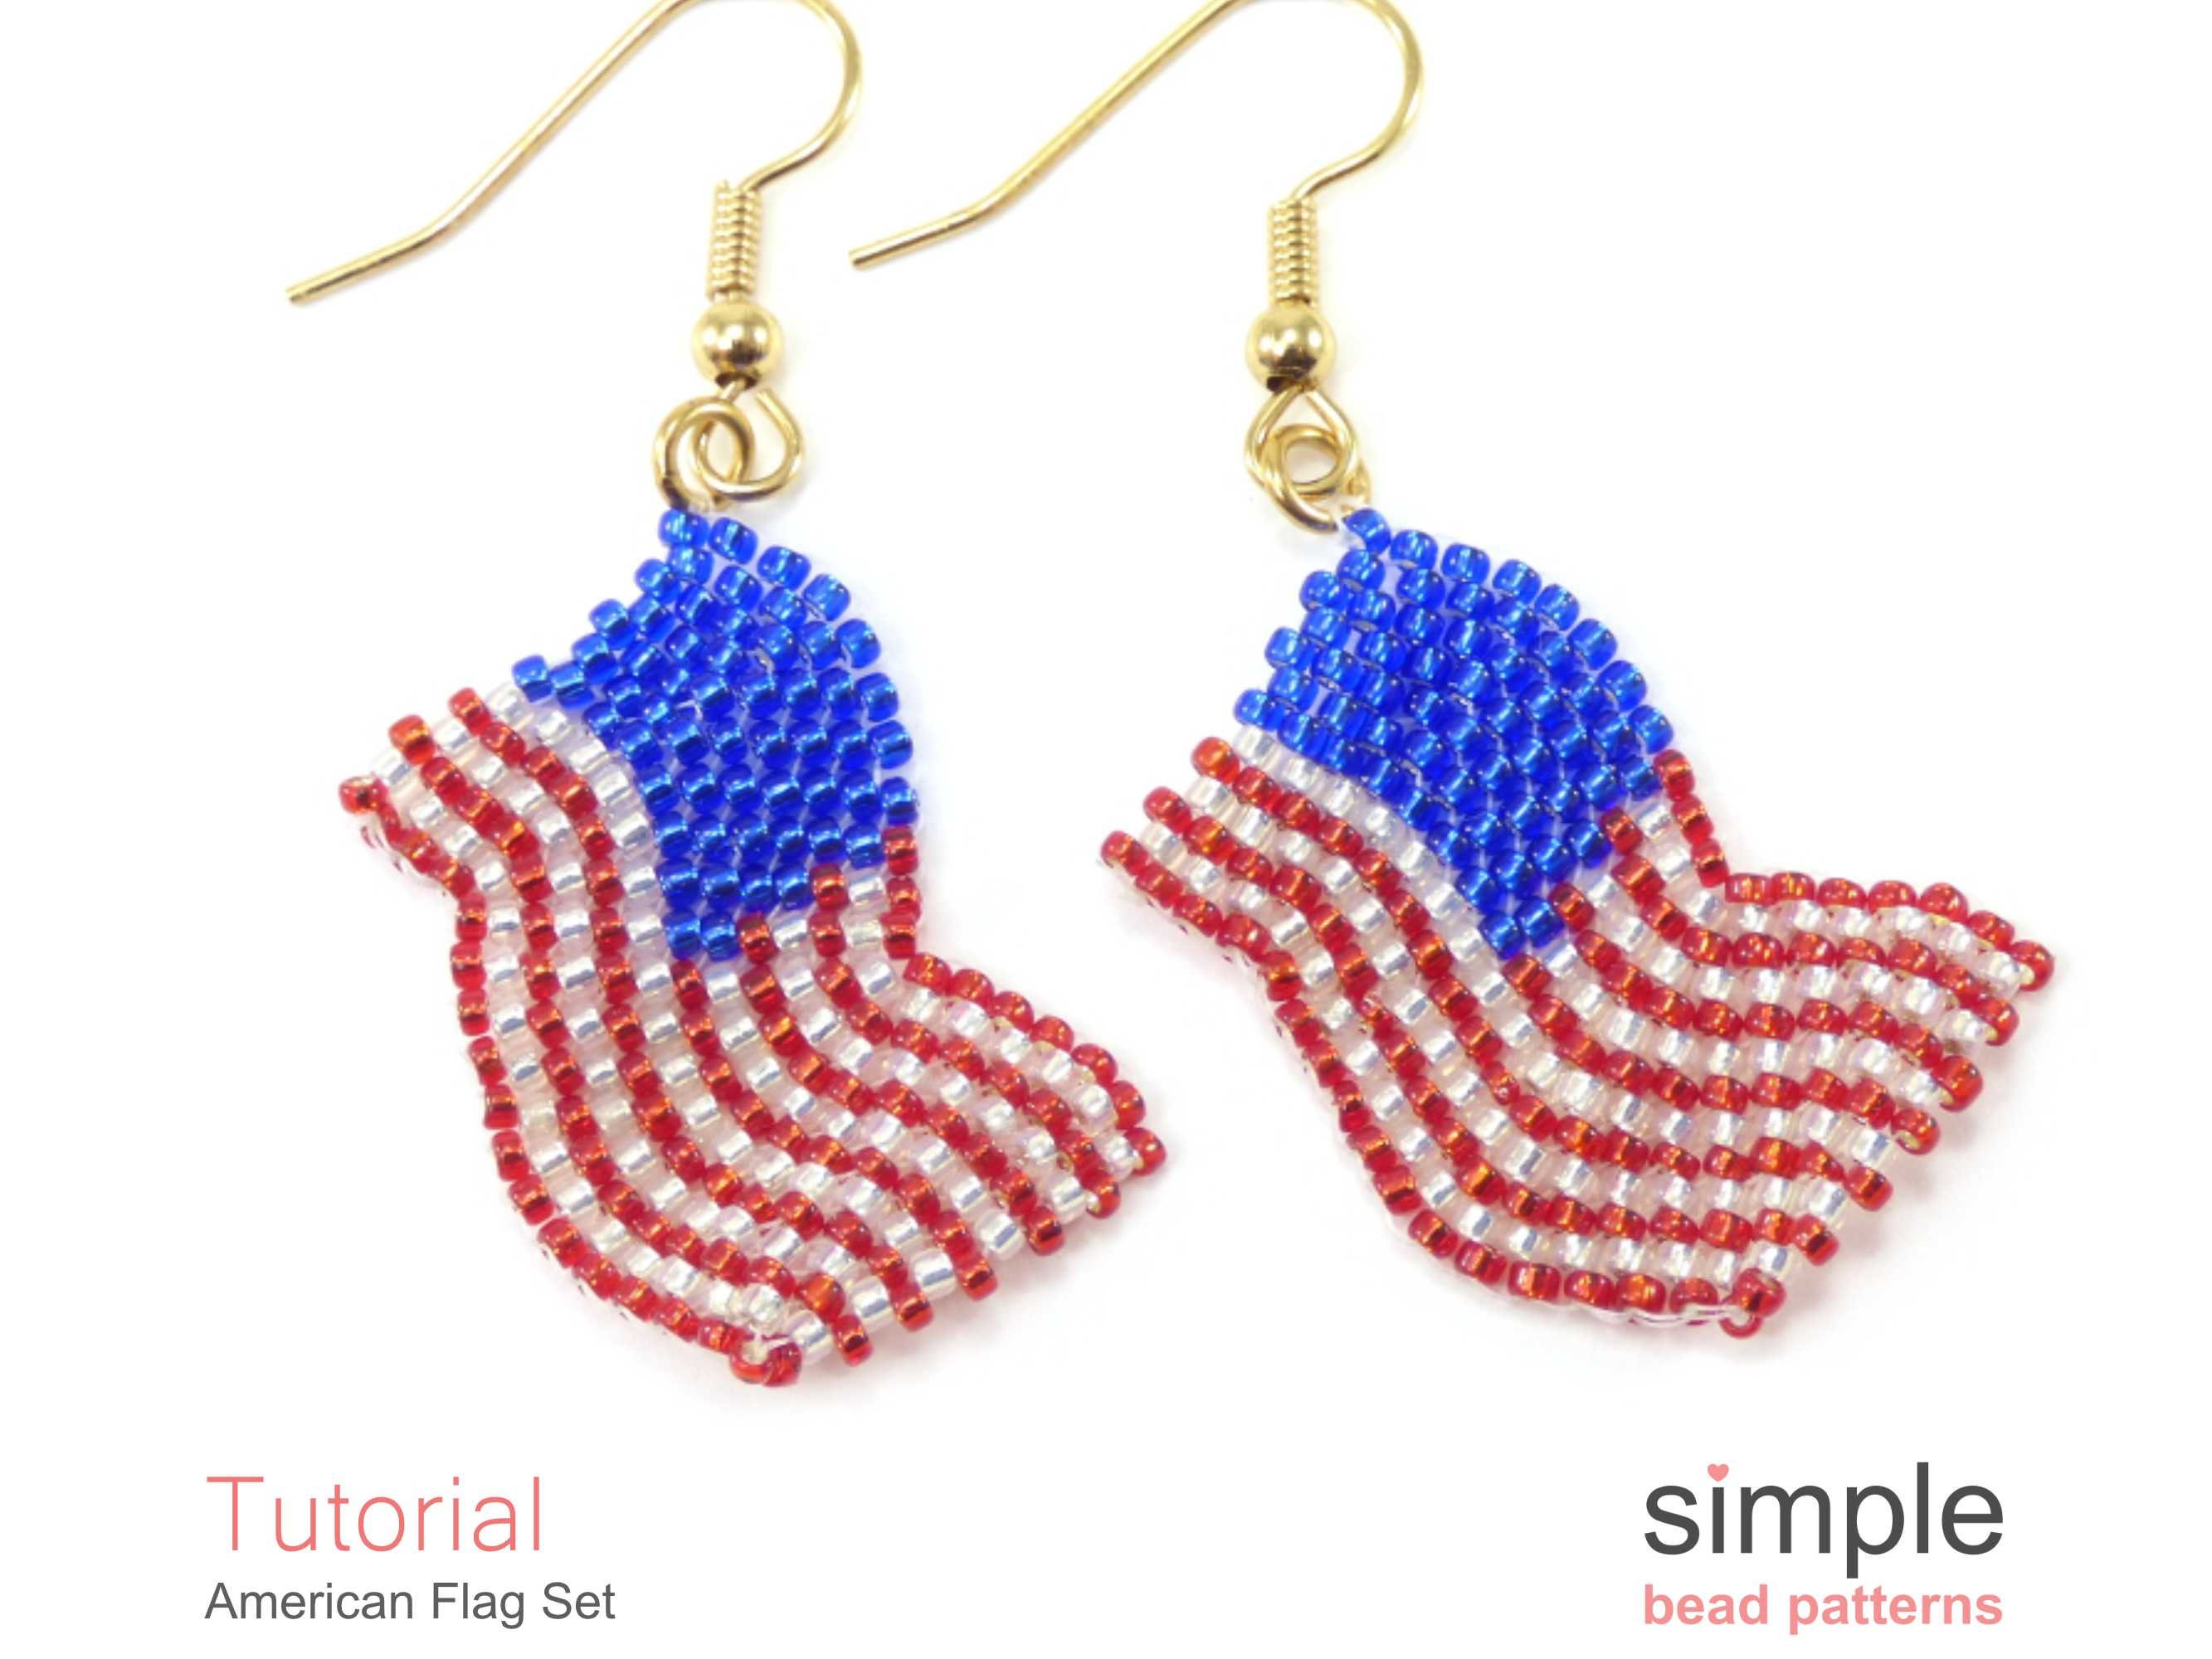 Quick & Simple Seed Beading: 11 Easy-to-Make Stylish Jewelry